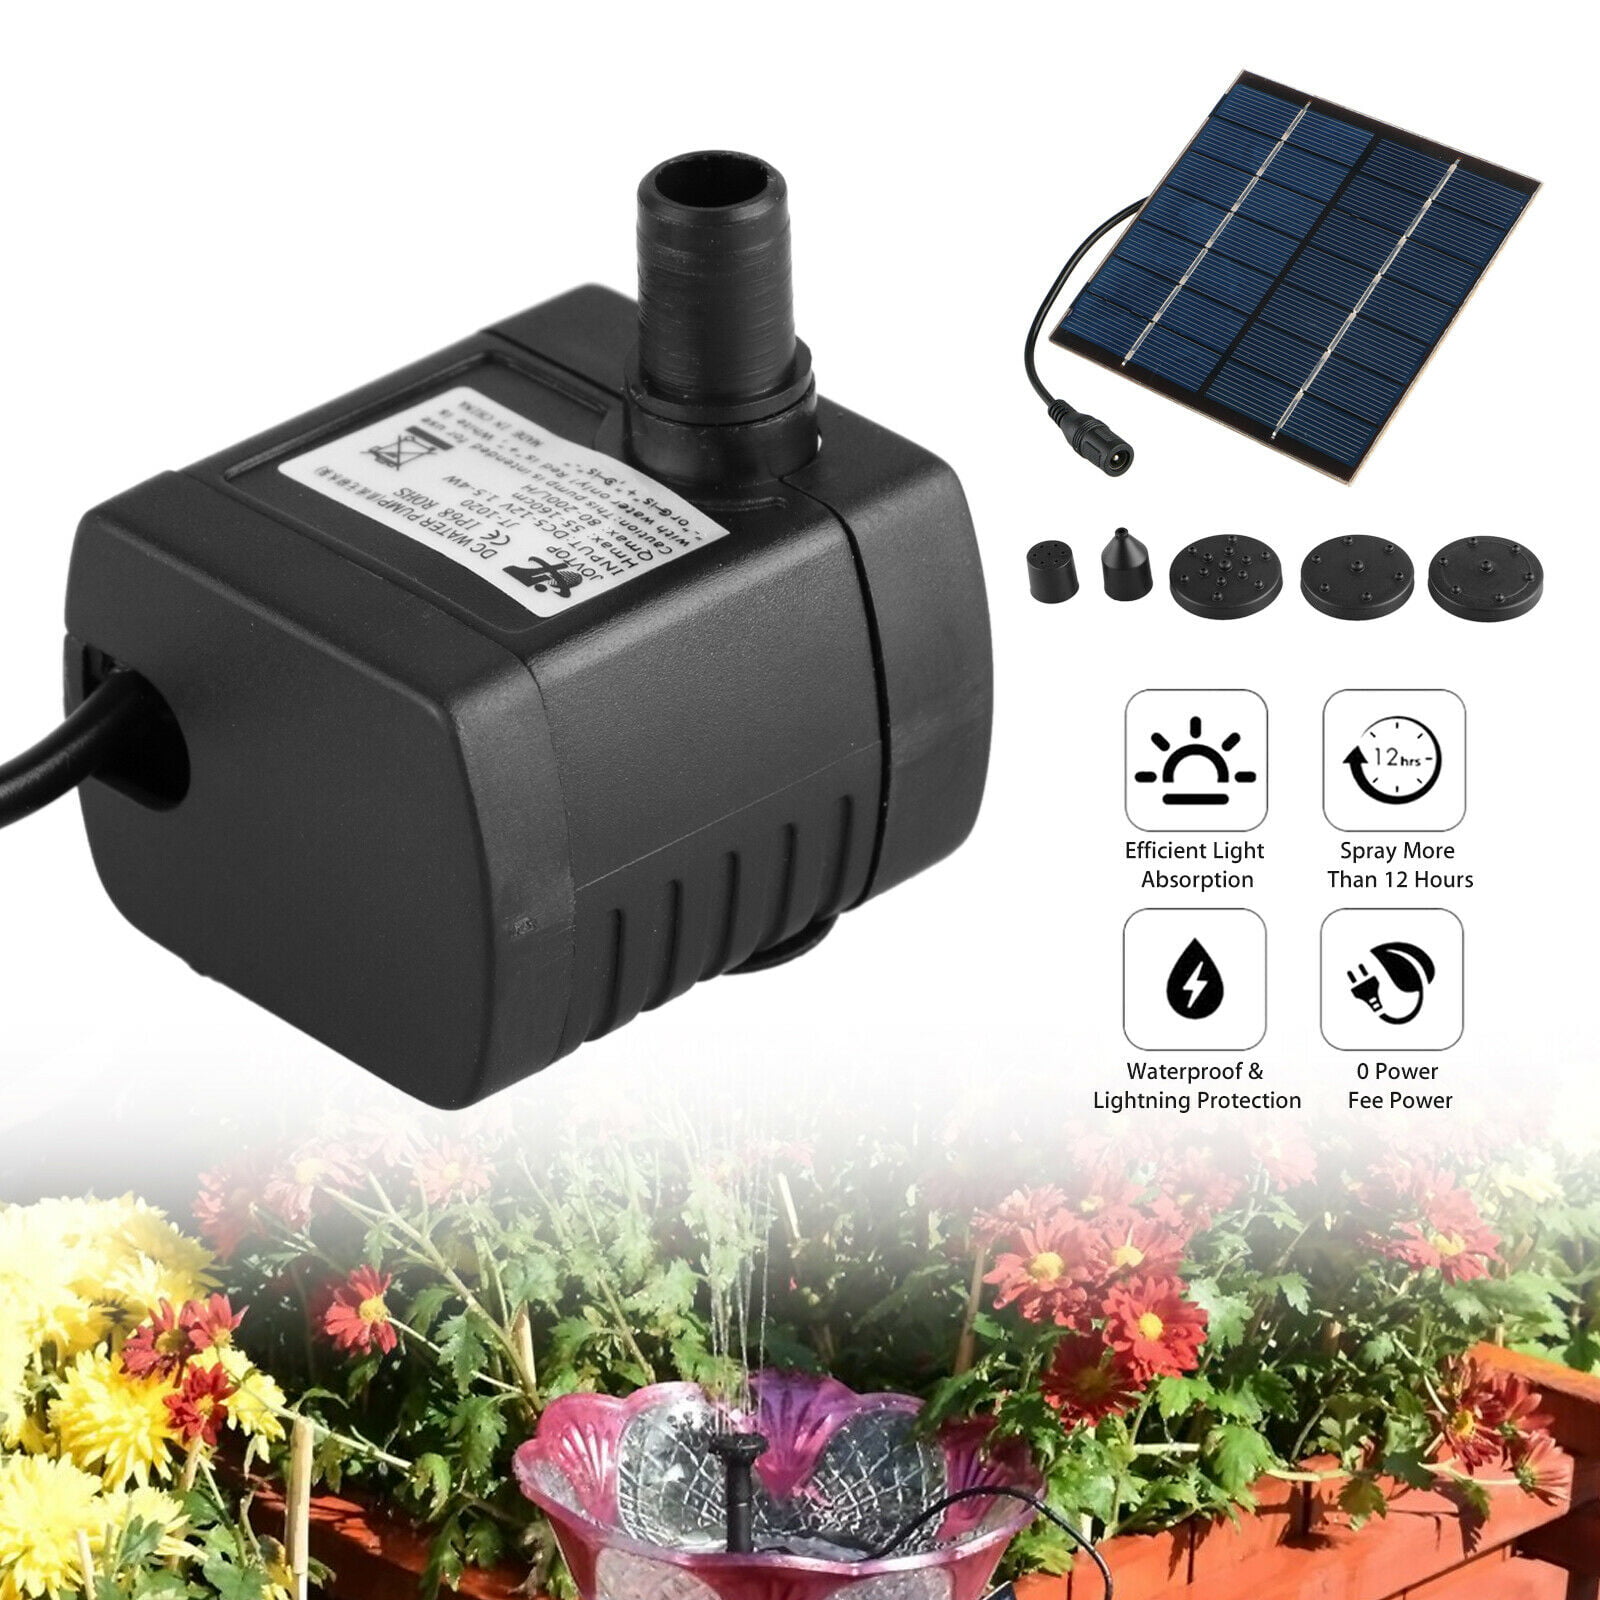 H Solar Power Fountain Water Pump Panel Kits Pool Garden Pond Watering 180 L 